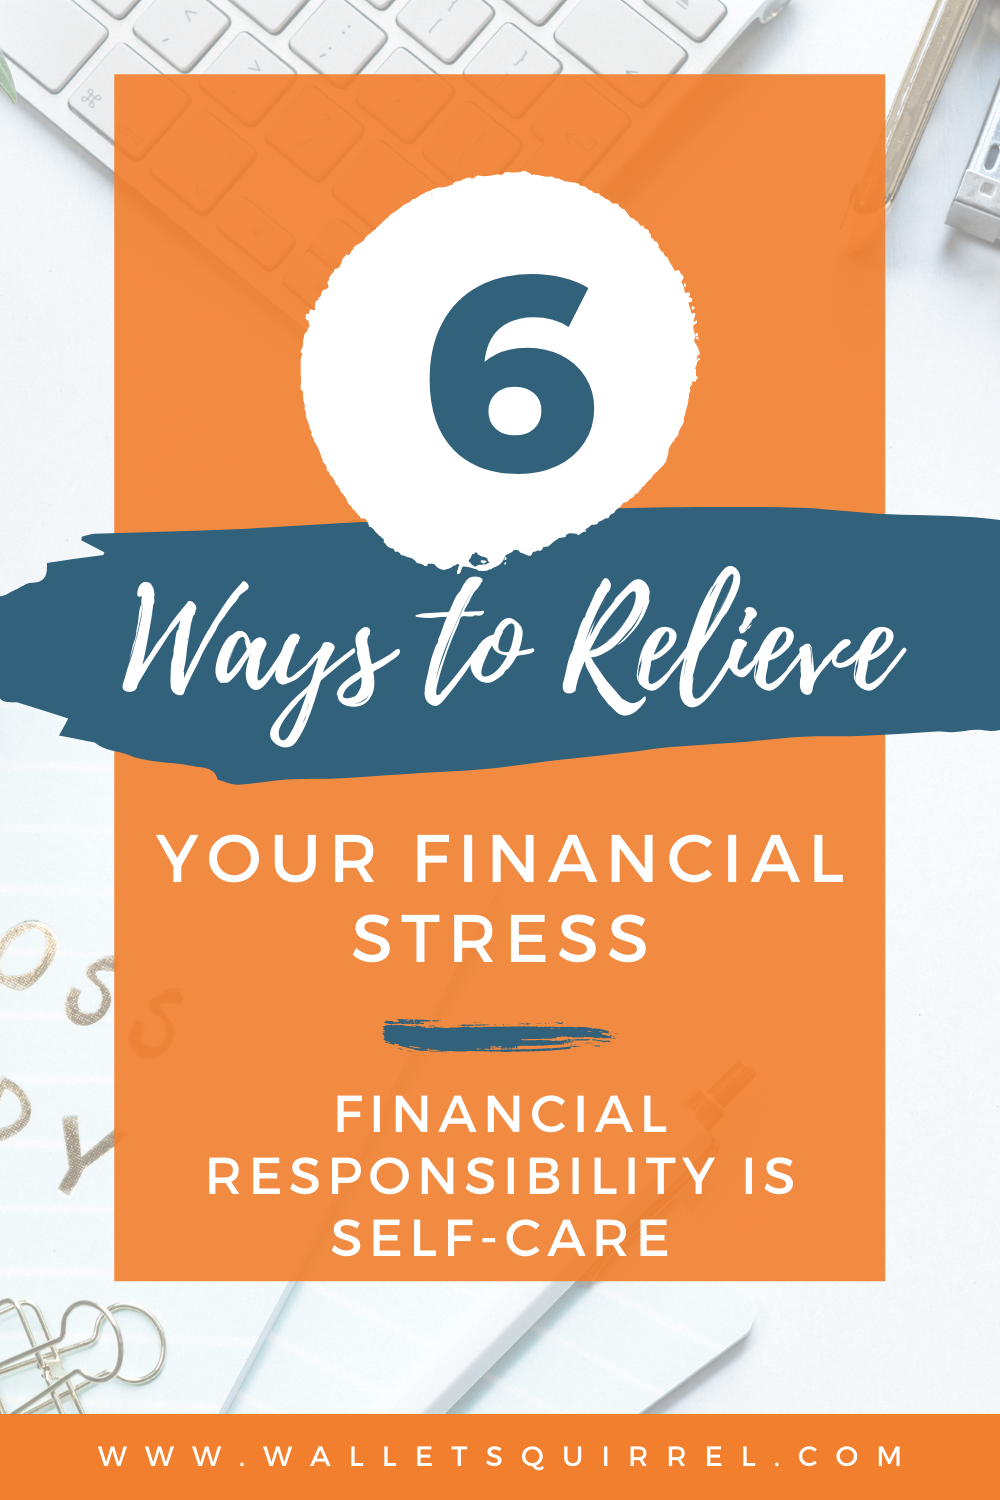 Before joining Wallet Squirrel, money was a major stress point in my life. The term, "Financial Responsibility" was something I was not familiar with. I didn't know how to properly manage my own finances. I did not know how to budget.